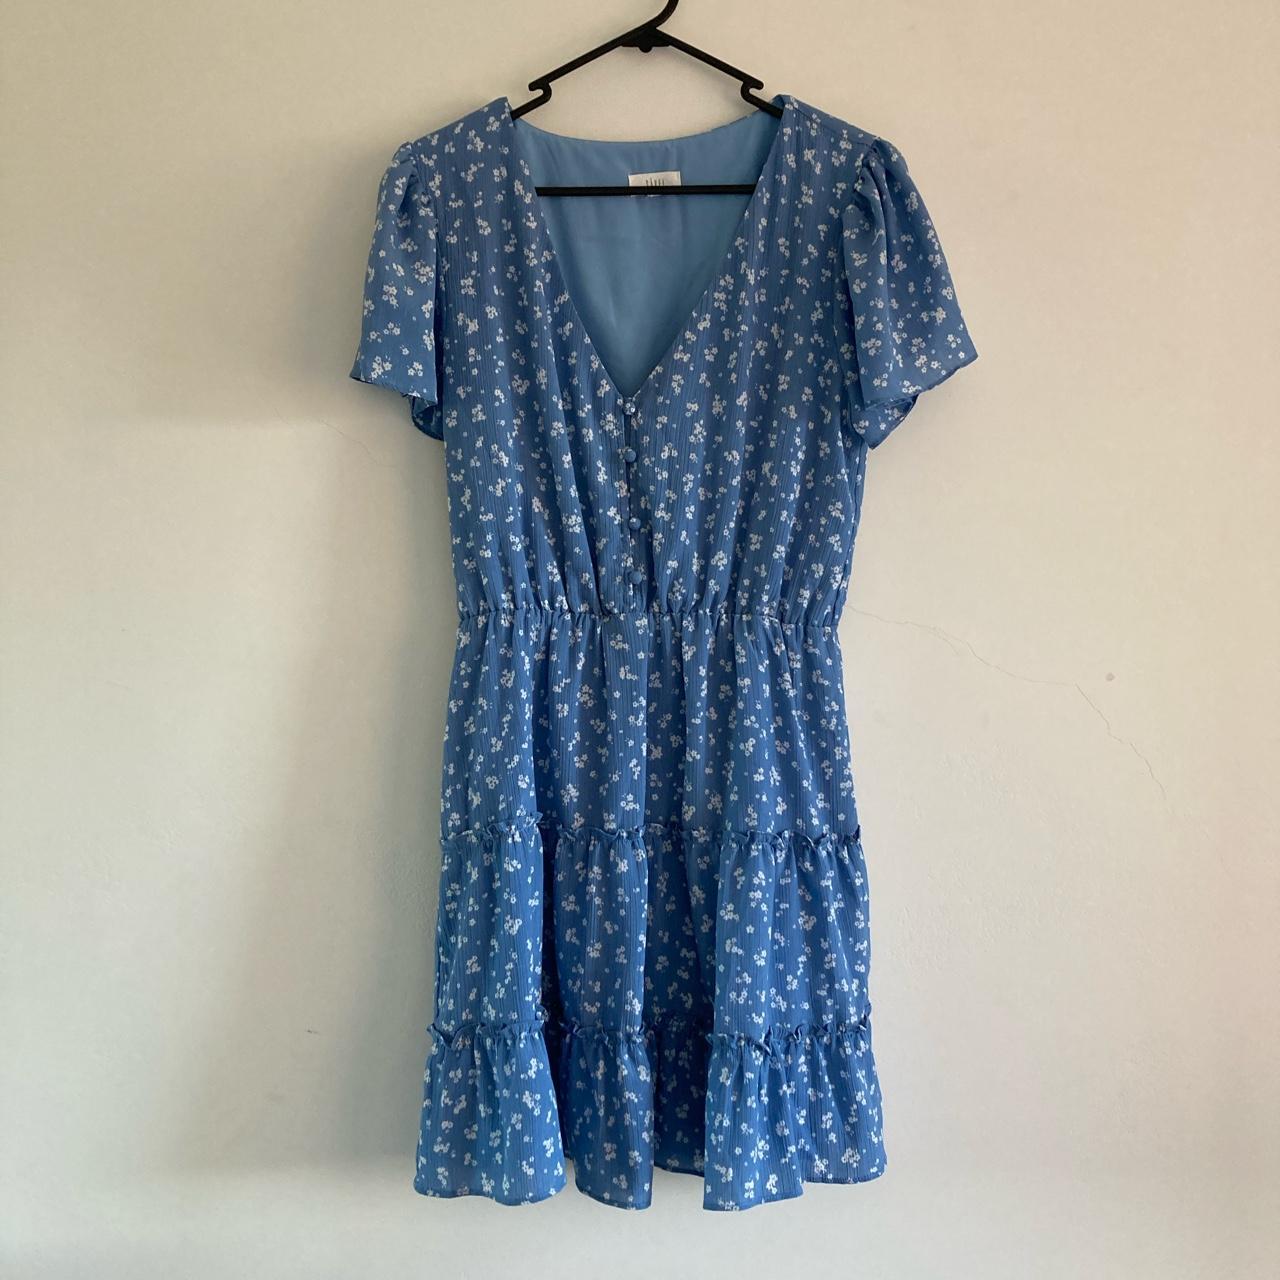 The Iconic - Savel Blue Flora Dress This is a... - Depop